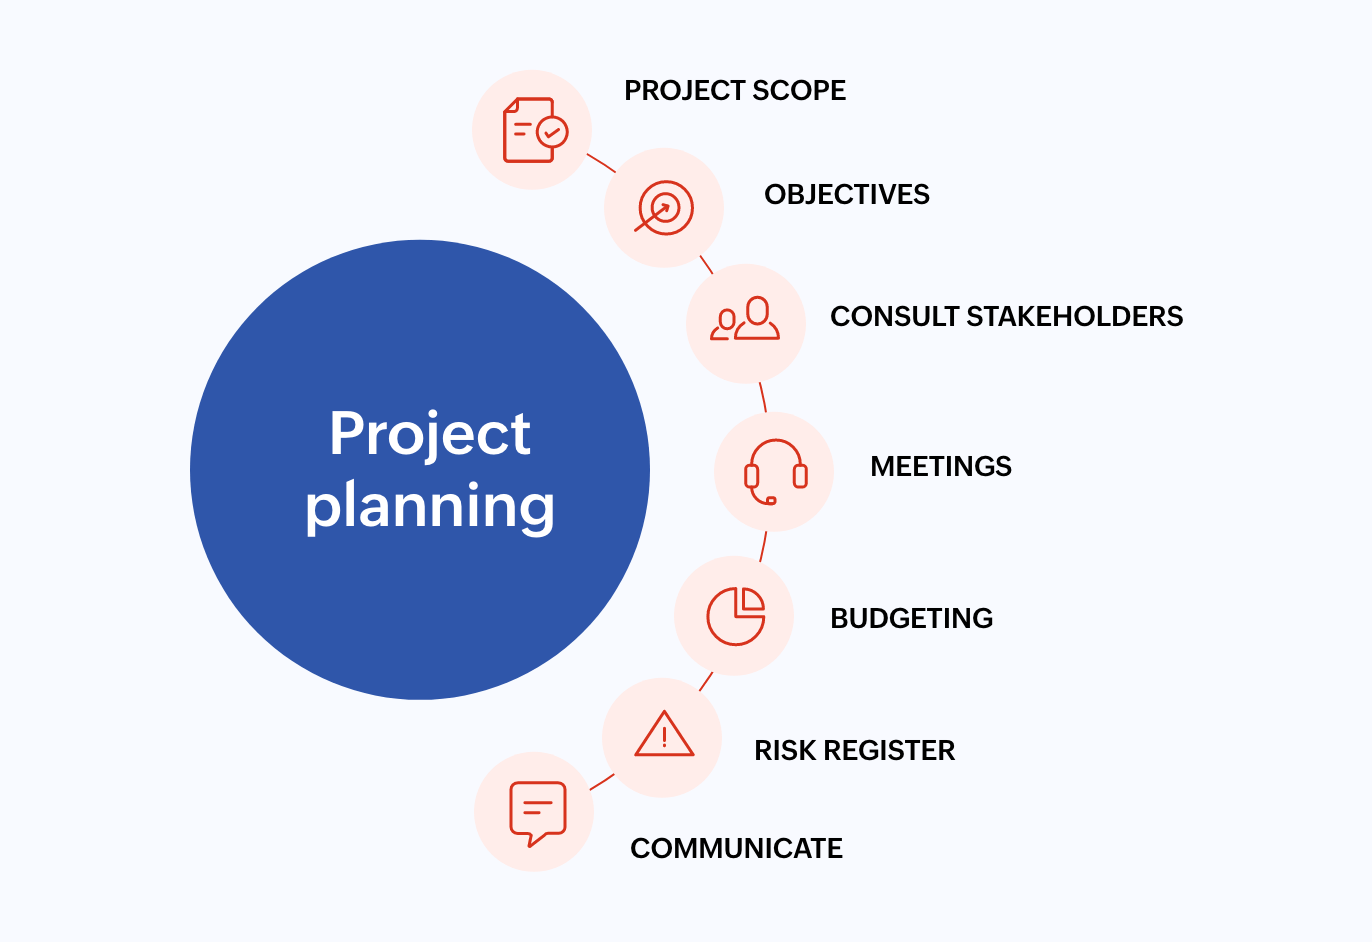 Project planning steps